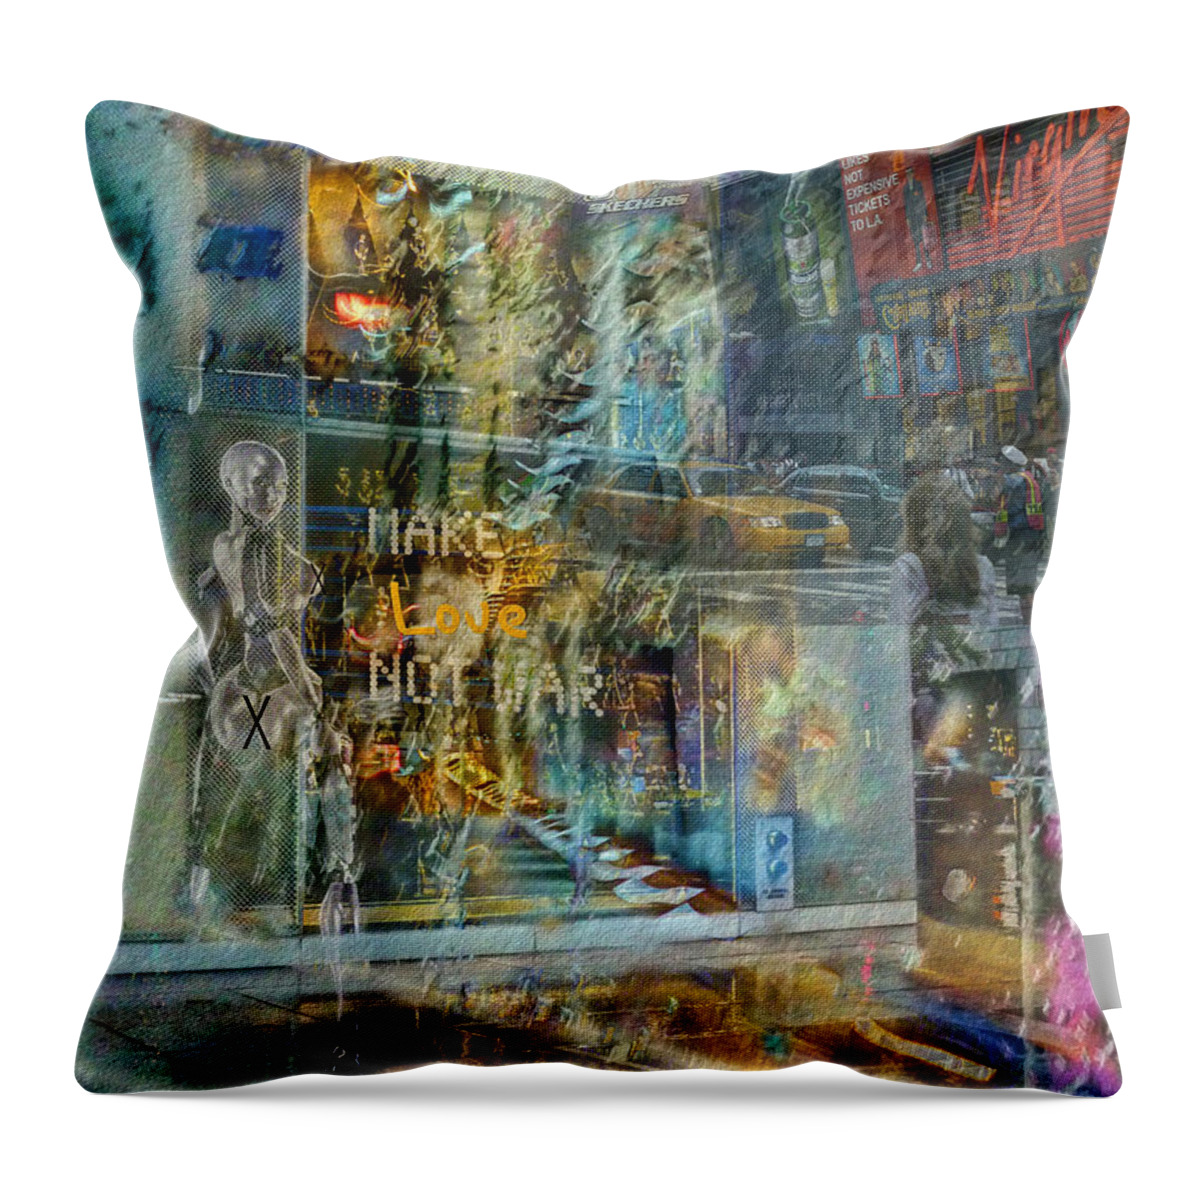 Photo Montage Throw Pillow featuring the photograph Make Love Not War by Jeff Breiman